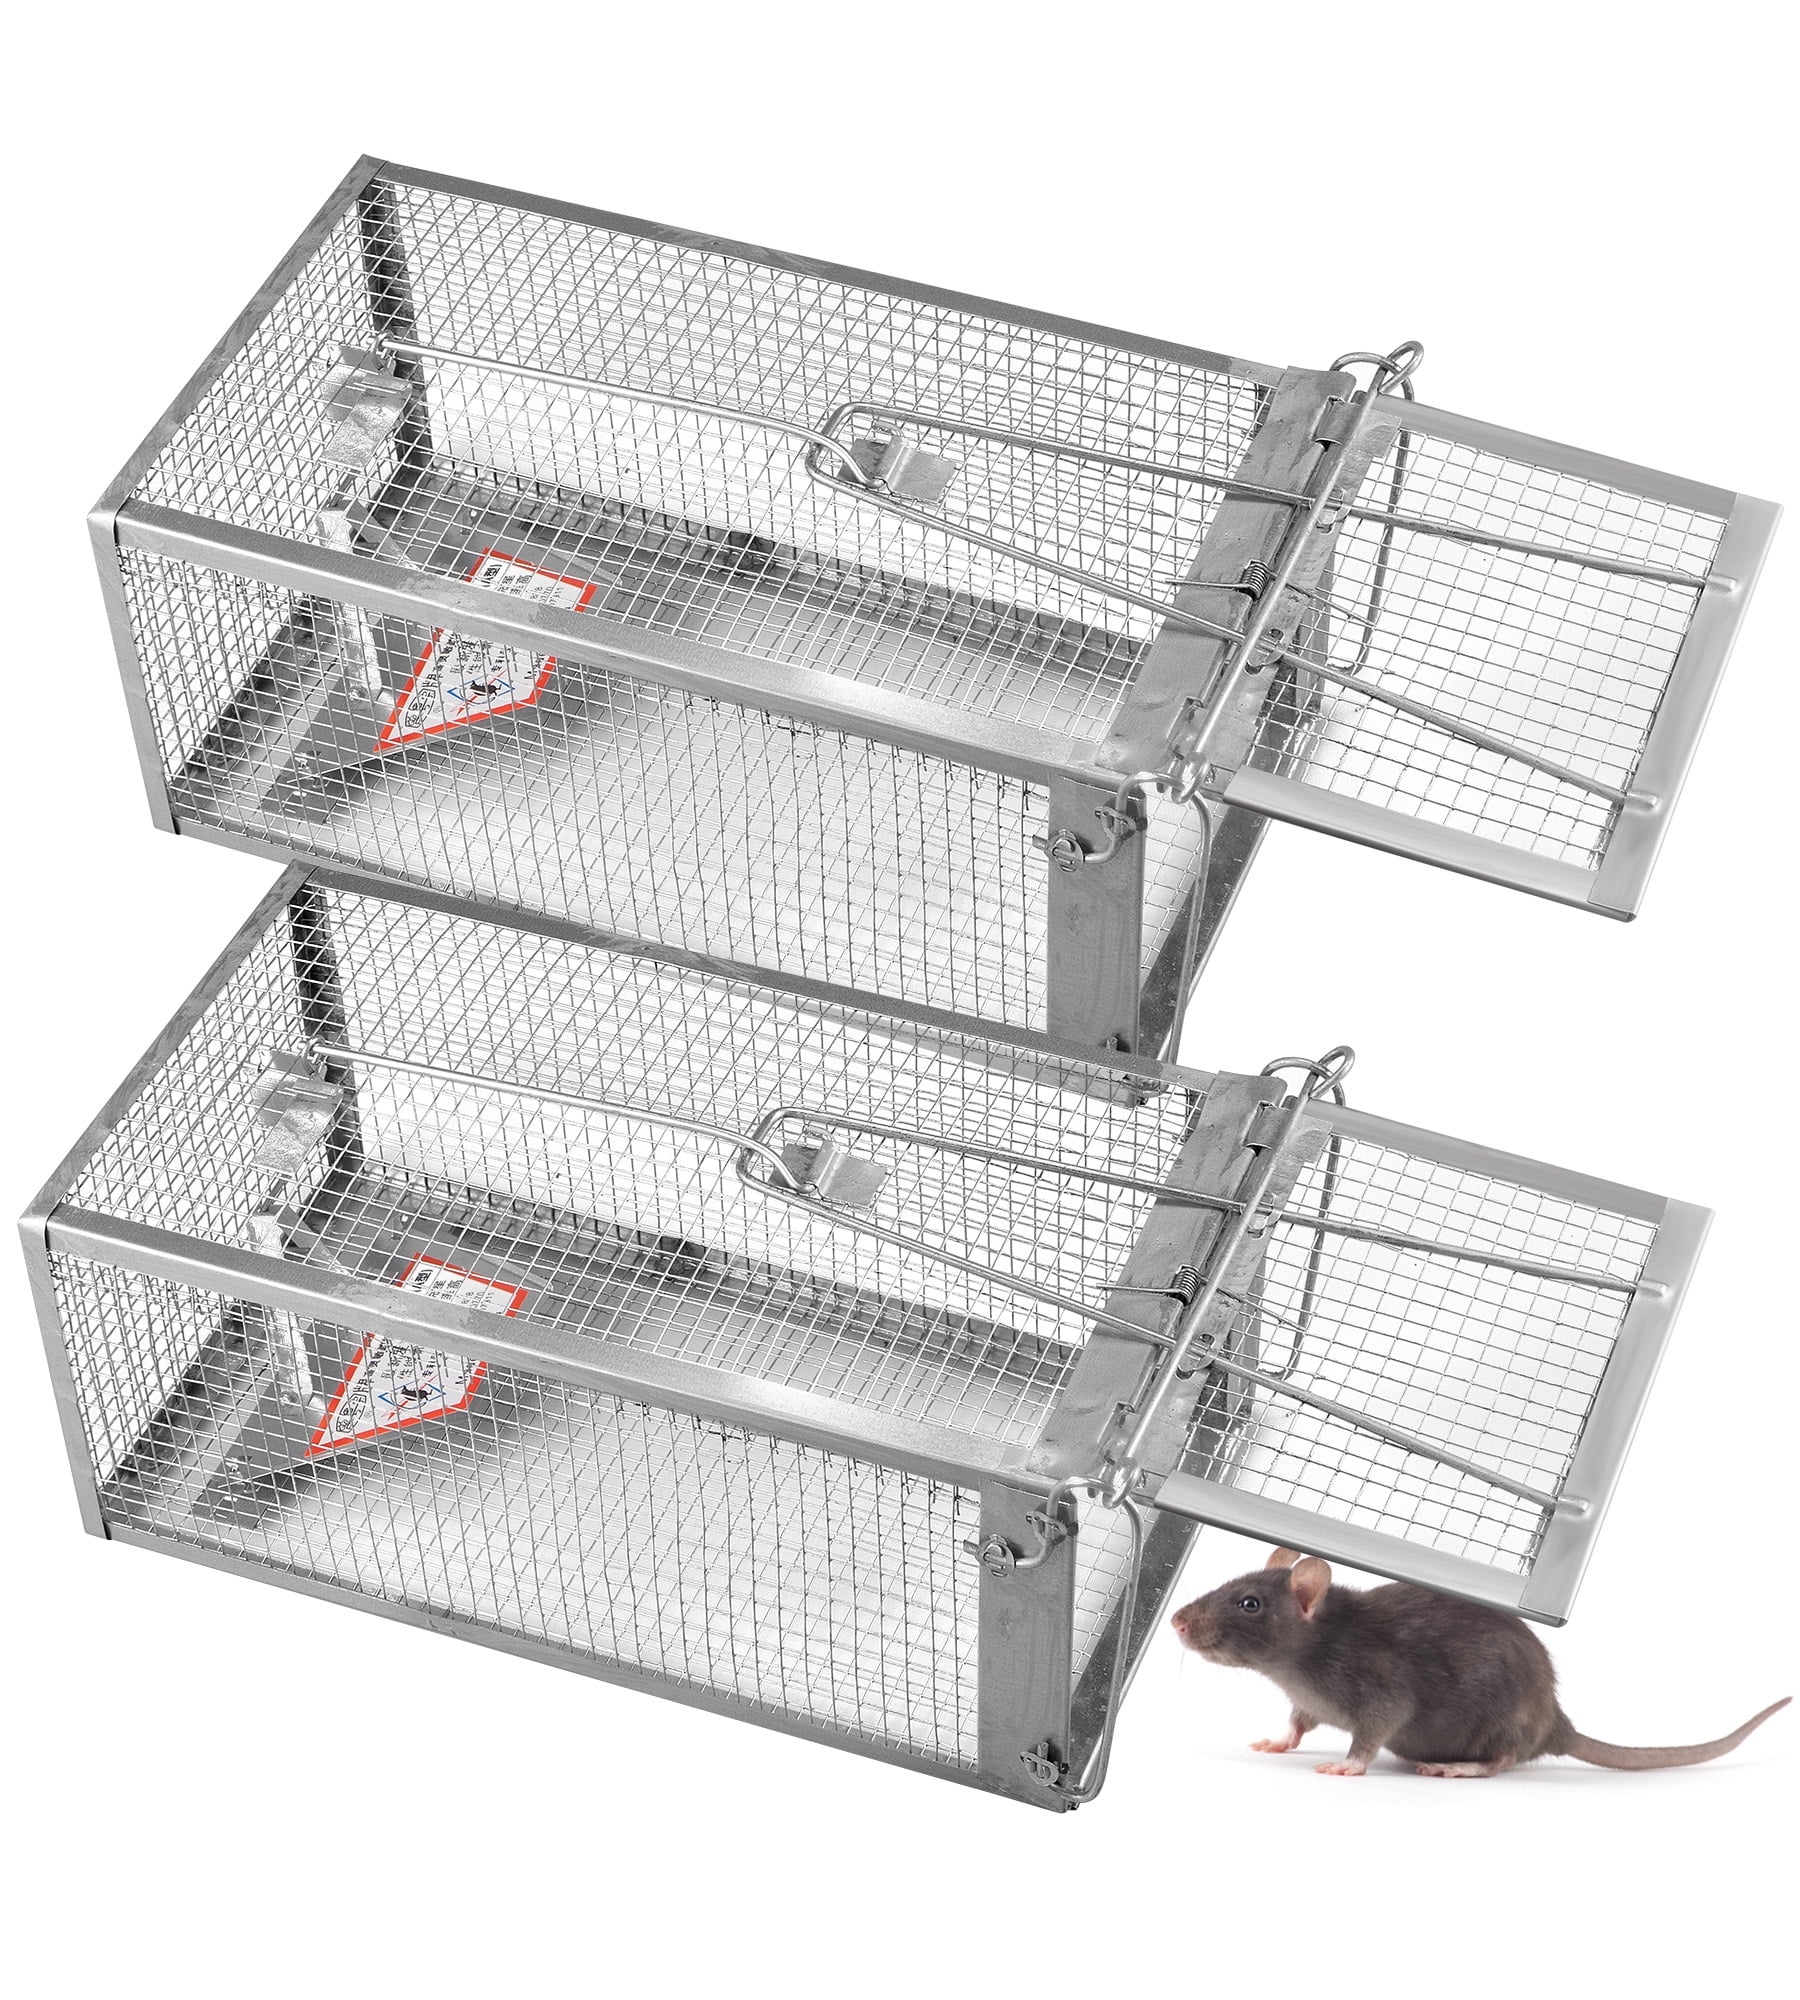  Humane Mouse Trap,Mouse Traps Indoor for Home,Safe for Kids  and Pets,Rat Trap Reusable for Outdoor,Easy to Set,Live Mouse Trap,Mice Trap  No Kill for Small Rodent,Voles,Hamsters,Moles (2 Door，Metal) : Patio, Lawn